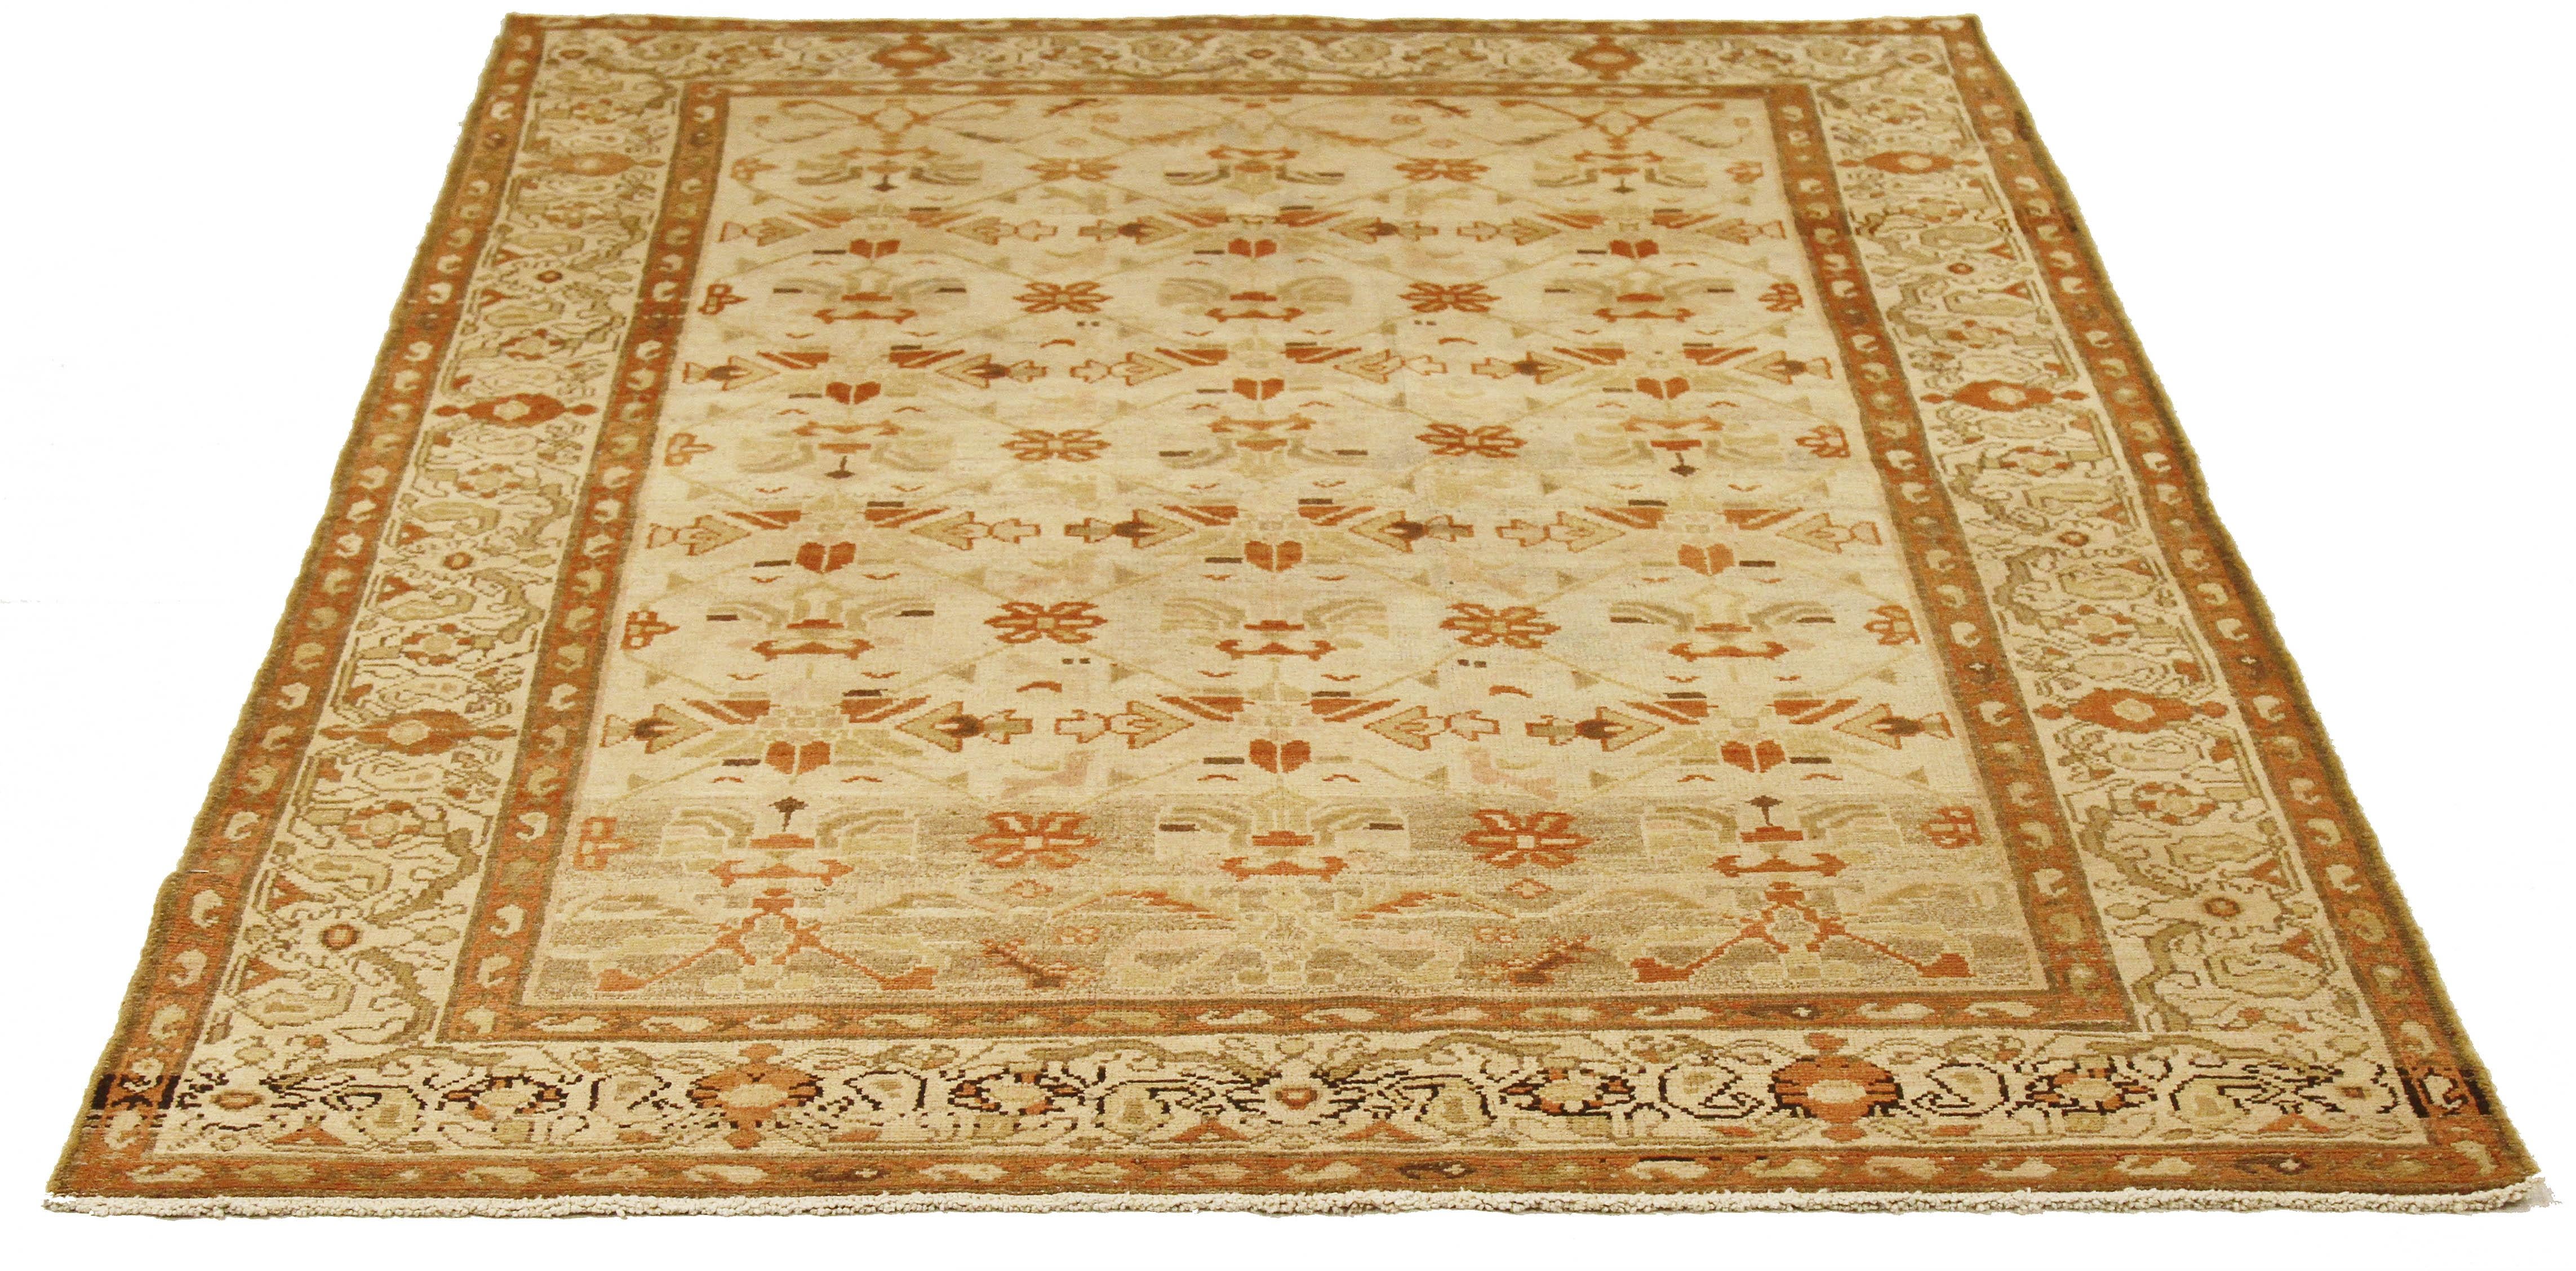 Antique Persian rug handwoven from the finest sheep’s wool and colored with all-natural vegetable dyes that are safe for humans and pets. It’s a traditional Malayer design featuring brown and beige tribal details on an ivory field. It’s a lovely